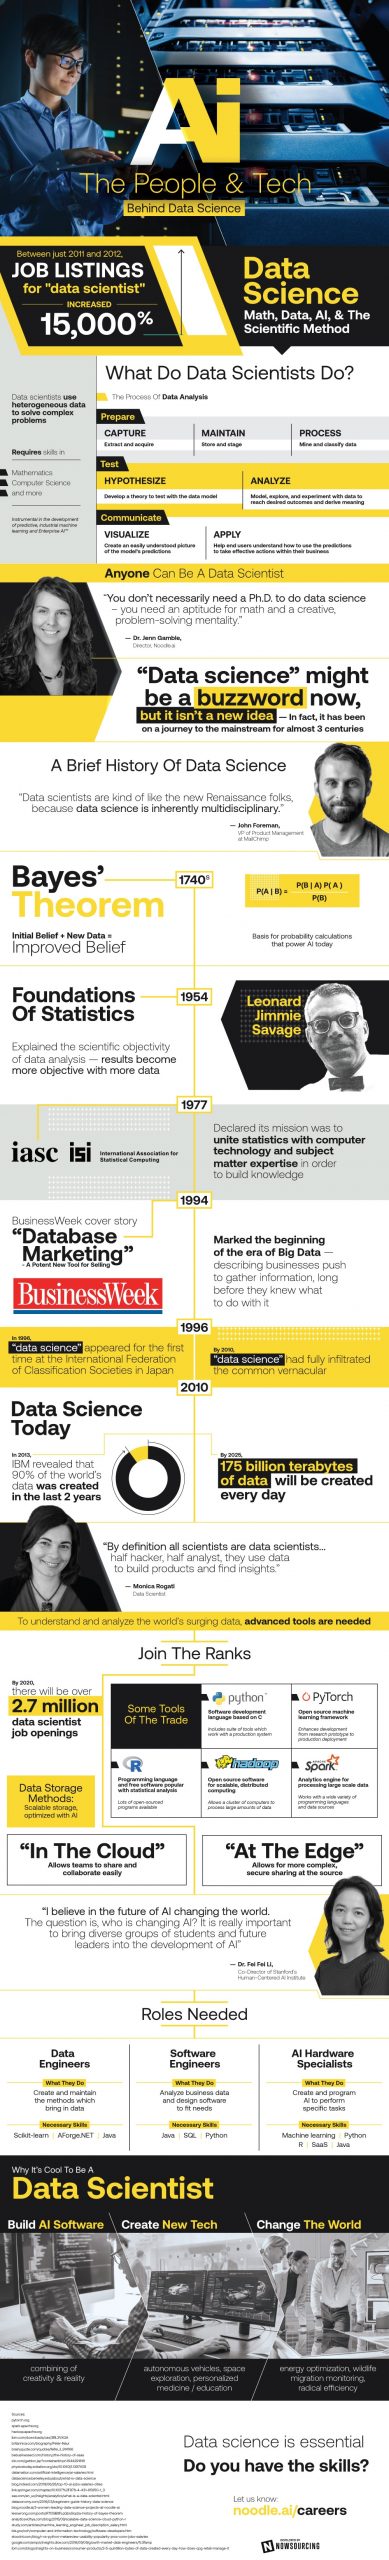 The Makers of Data Science